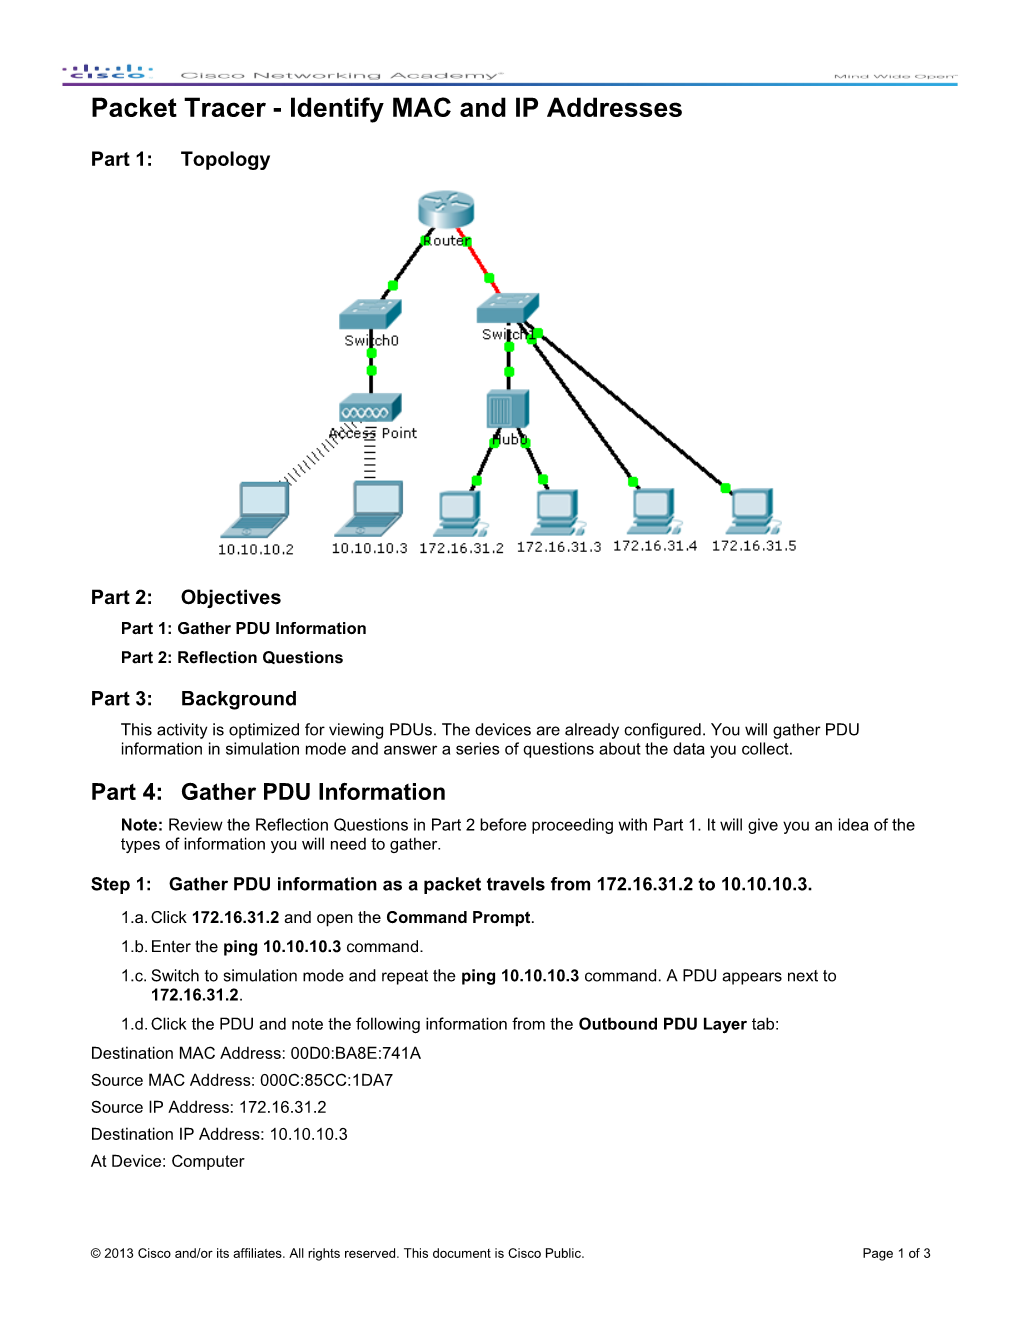 Packet Tracer - Identify MAC and IP Addresses